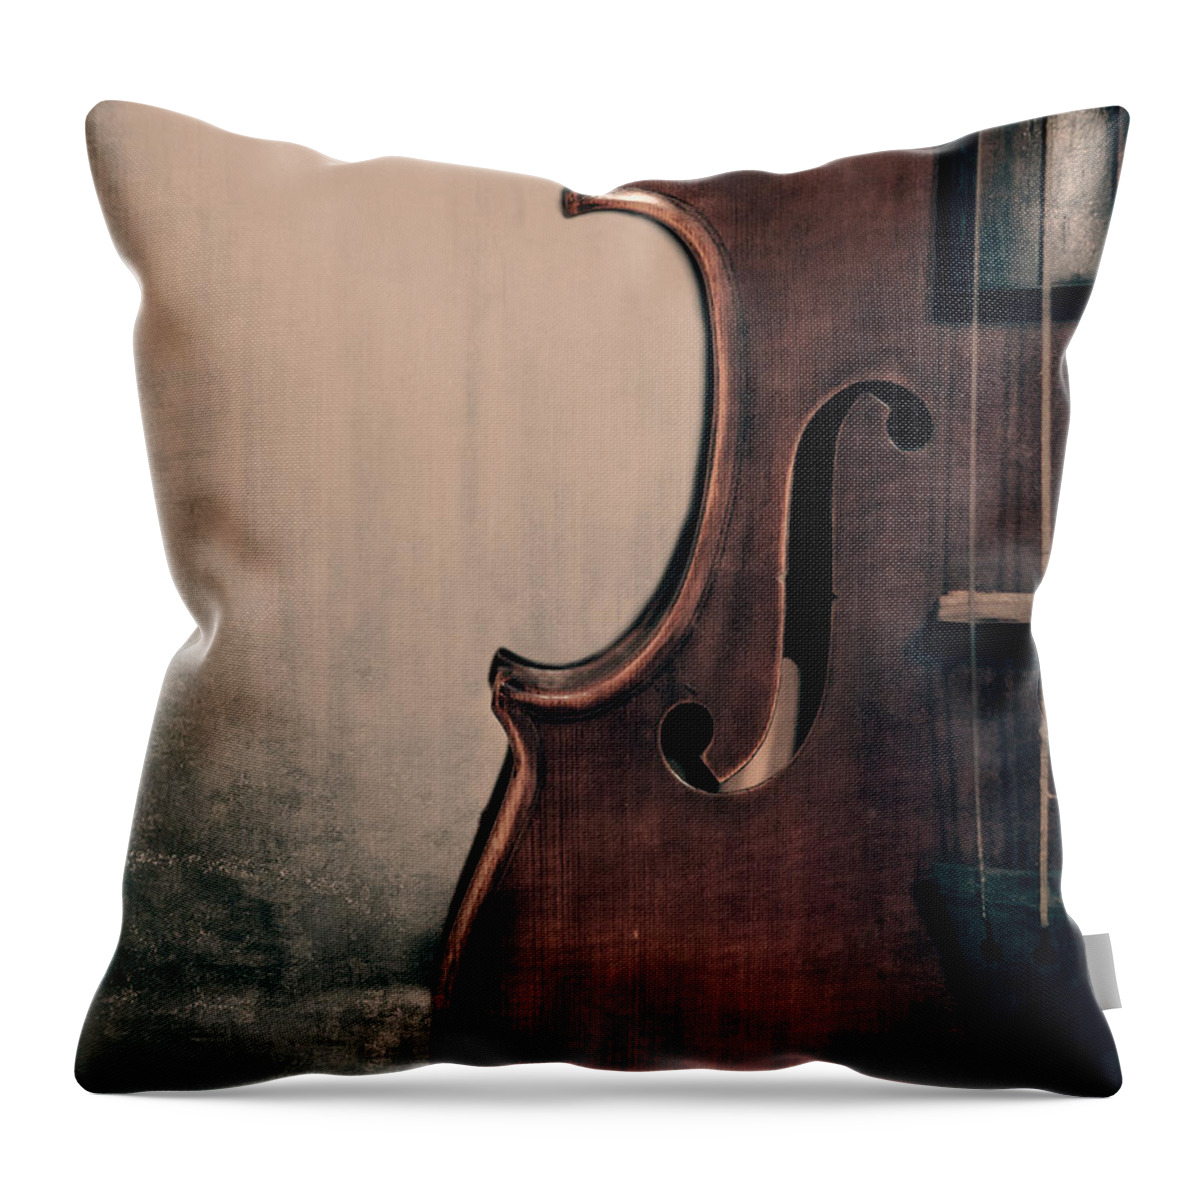 Violin Throw Pillow featuring the photograph Violin Portrait by Kadwell Enz